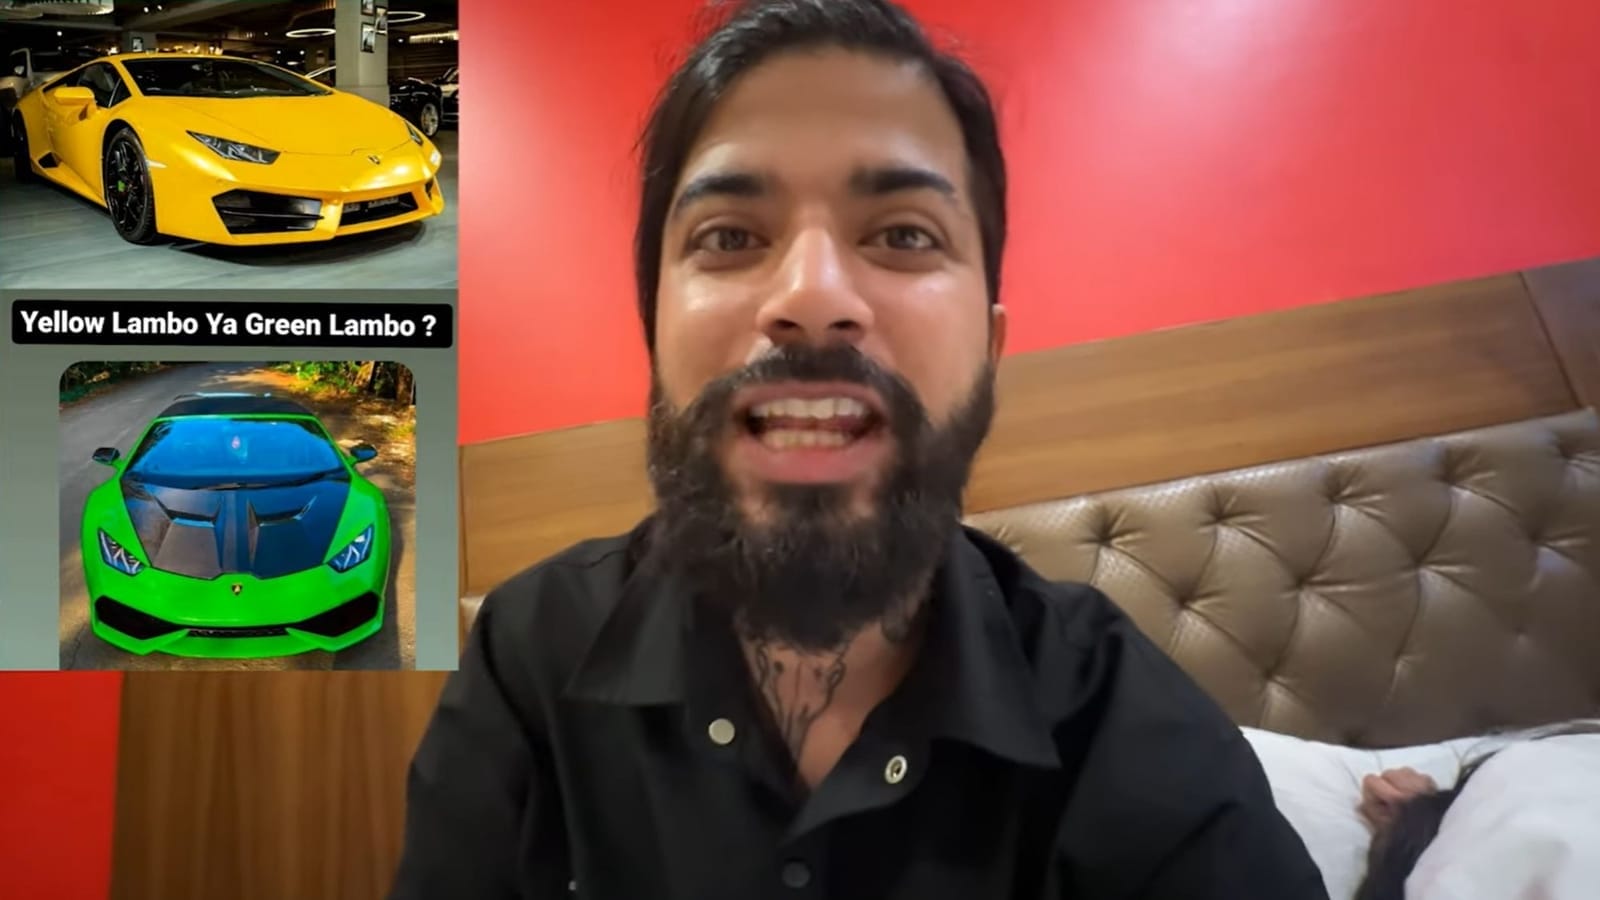 UK07 Rider Anurag Dhobal all set to add Lamborghini Huracán to his fleet, asks fans to help him decide colour